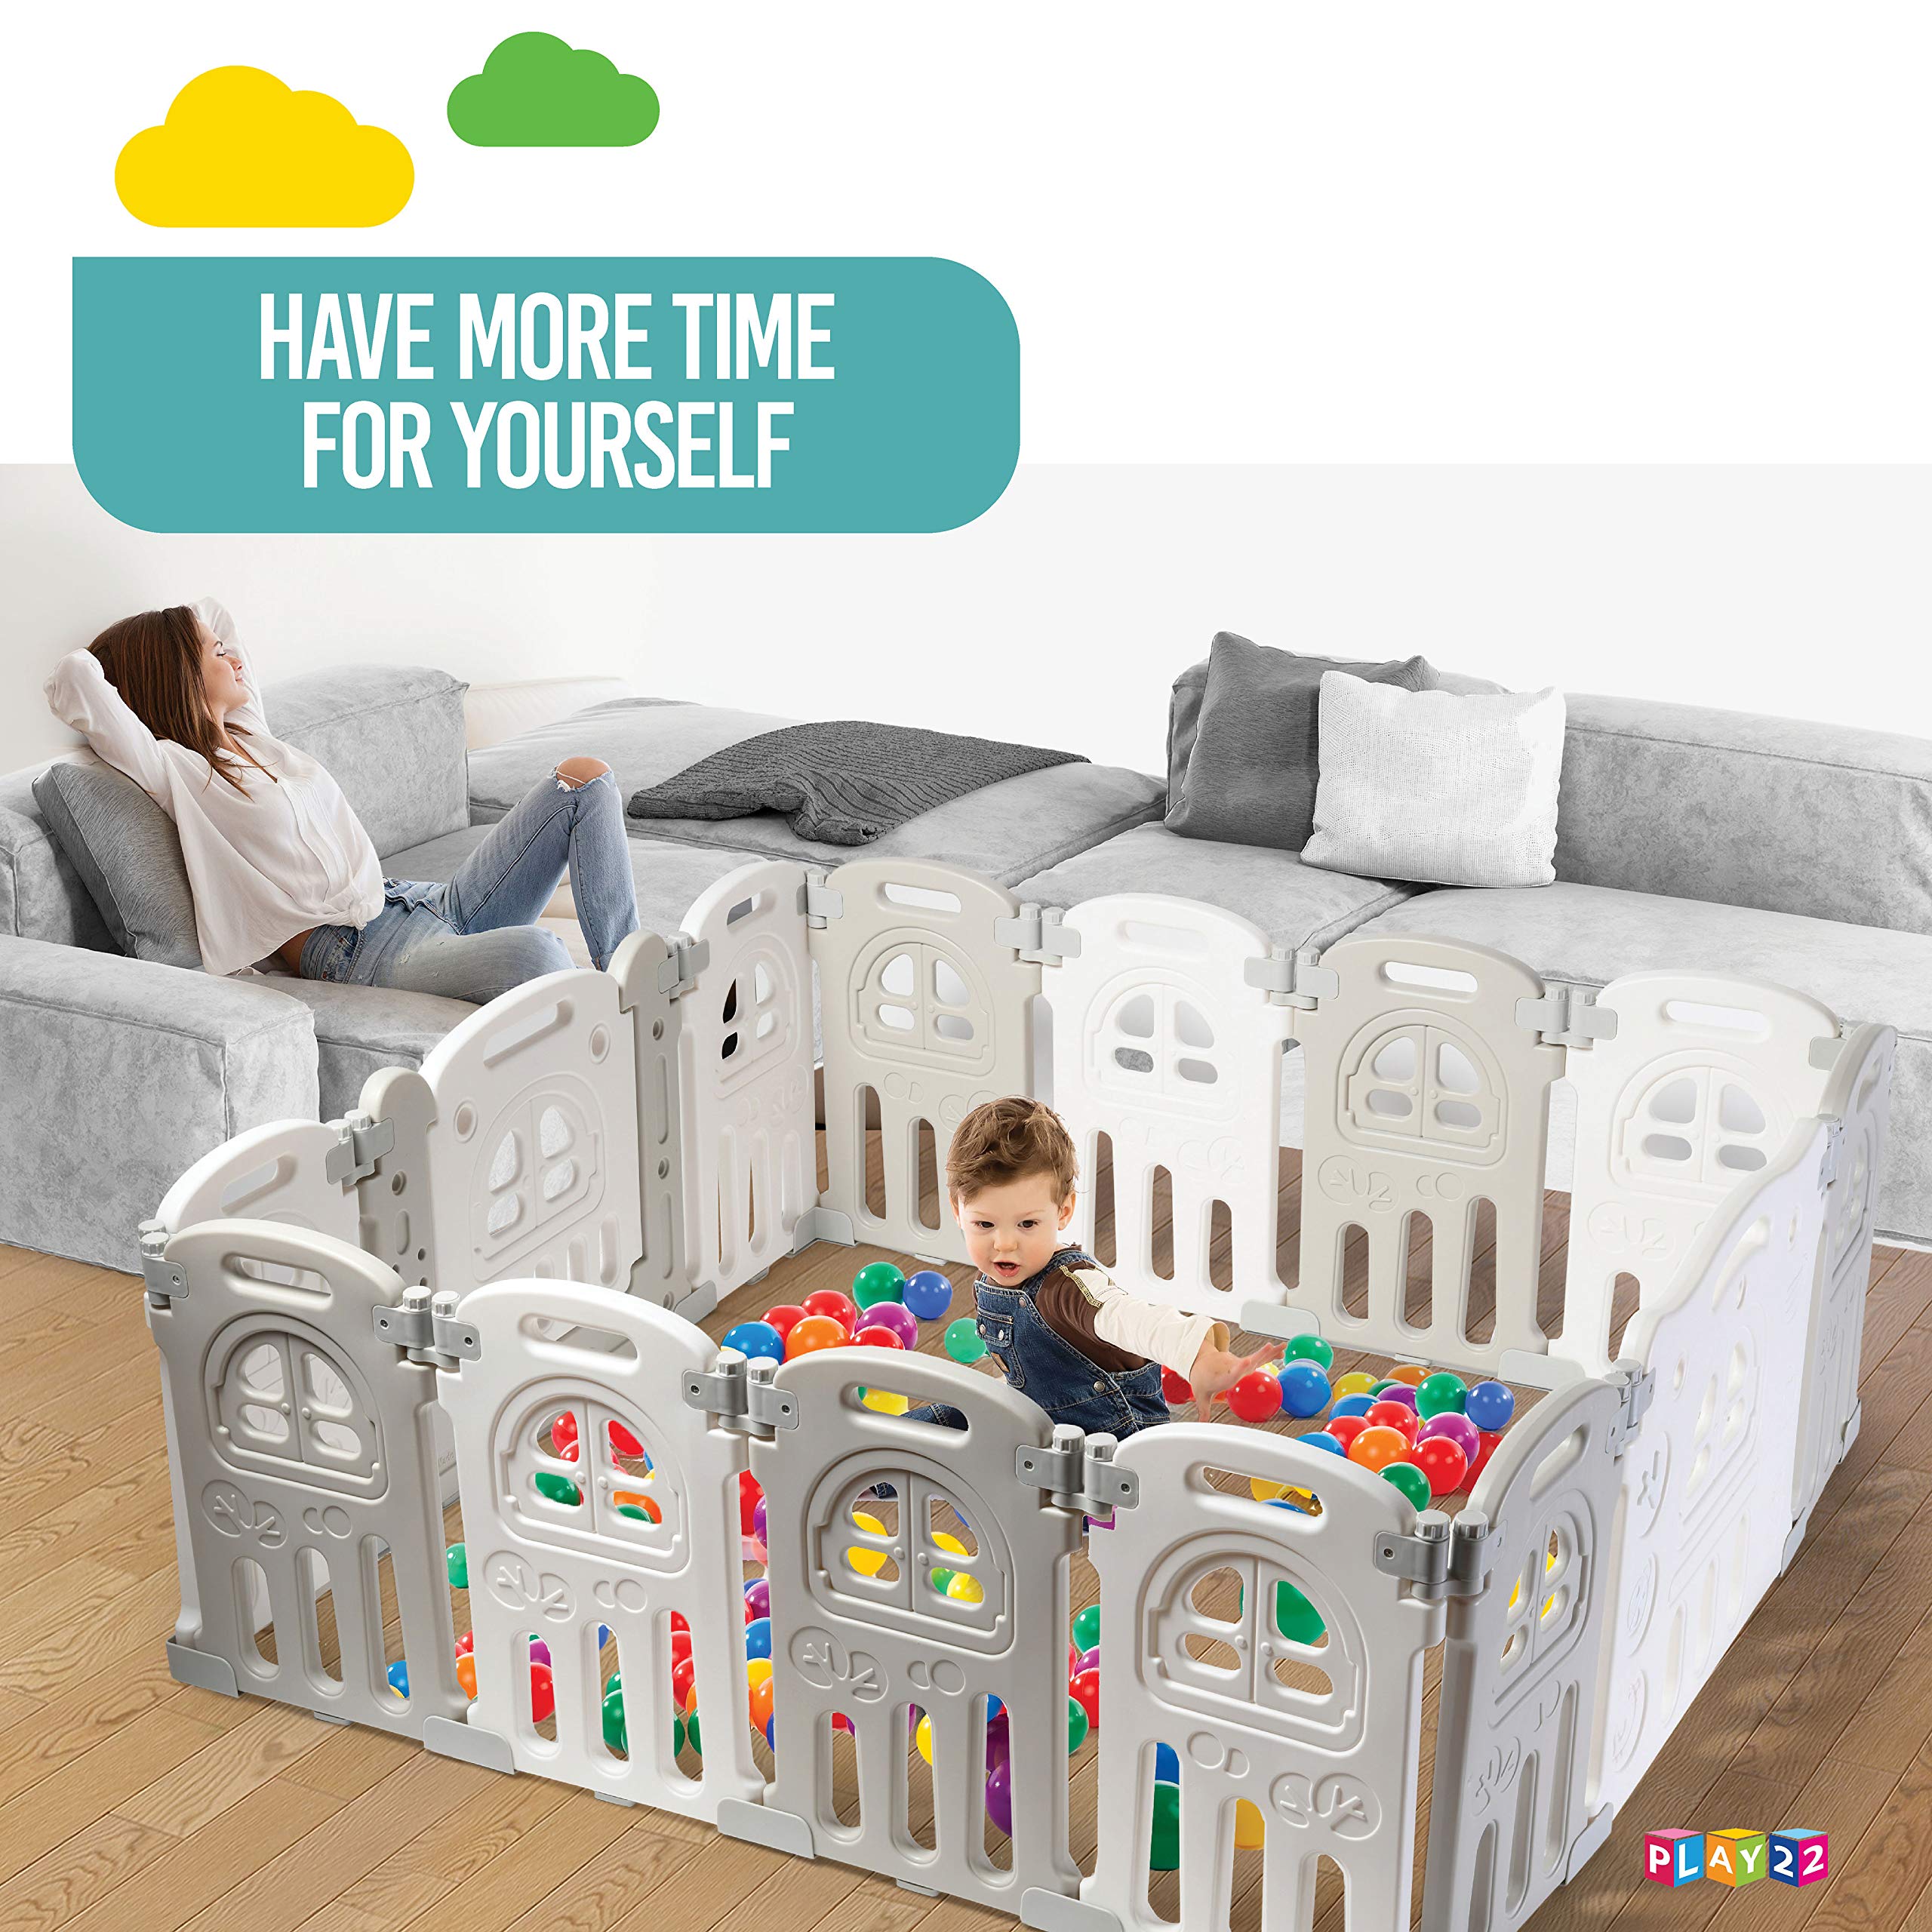 Play22 Foldable Baby Playpen 14 Panel - Kids Safety Activity Play Center - Safety Play Yard Play Pens for Babies - Safety Gates for Indoor and Outdoor Play - Adjustable Shape